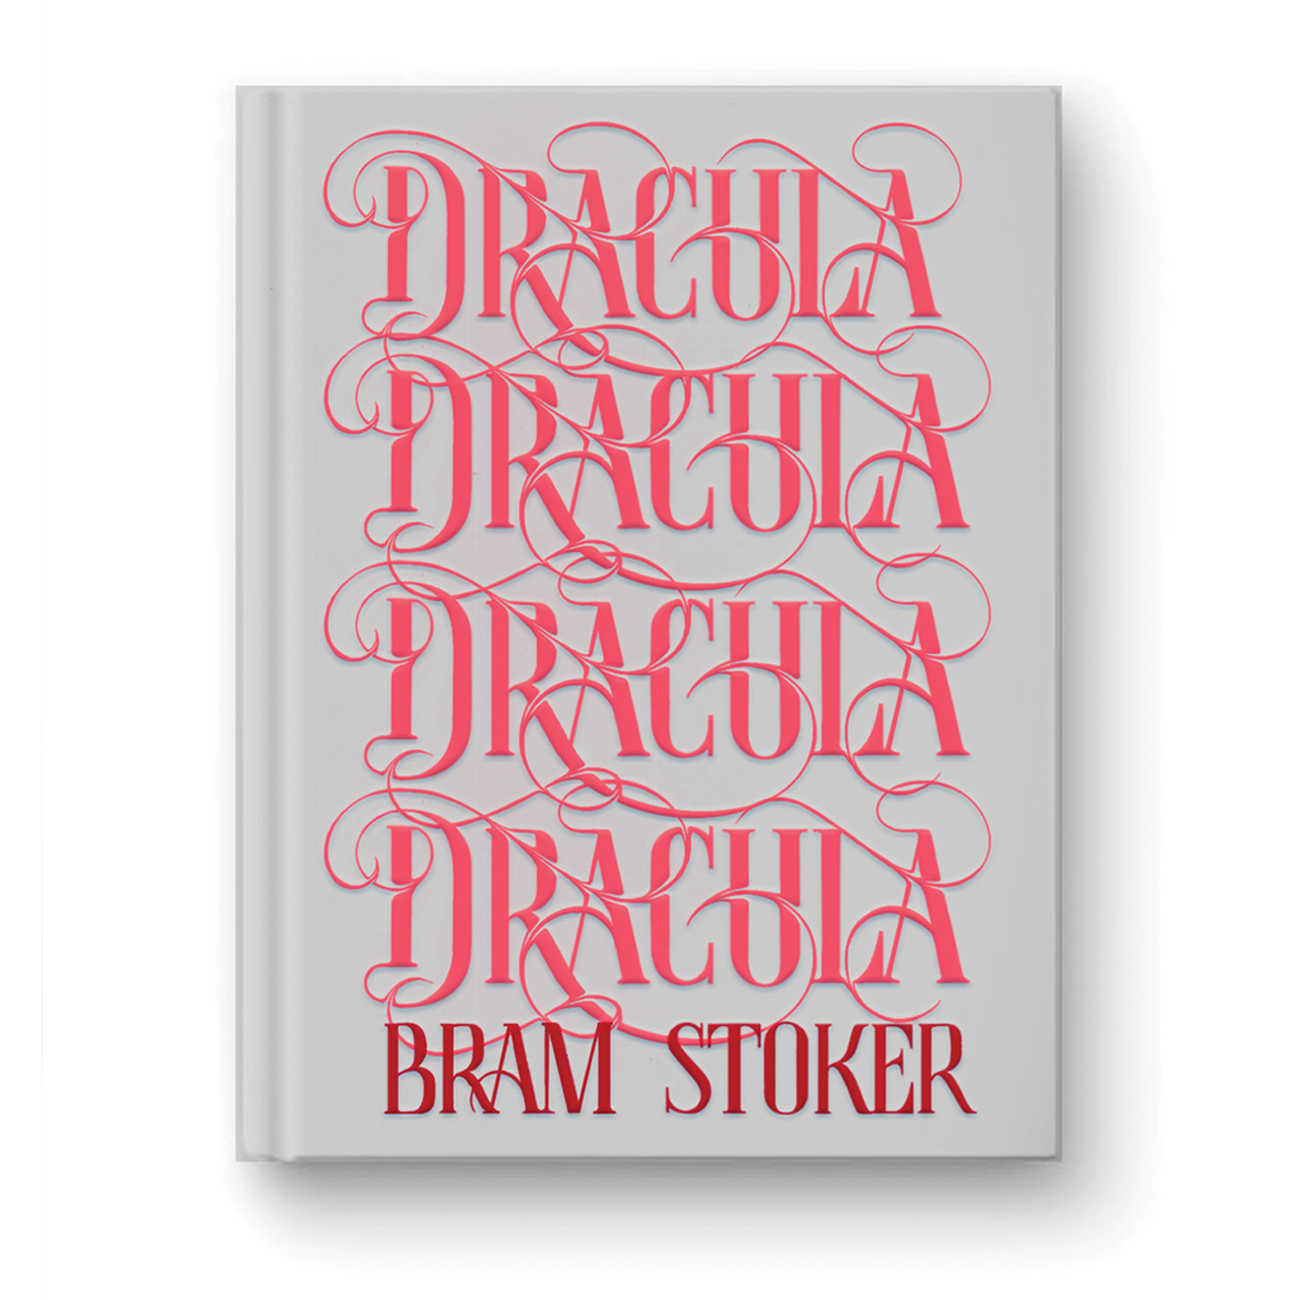 A book cover on which there is the text in red: DRACULA. BRAM STOKER.